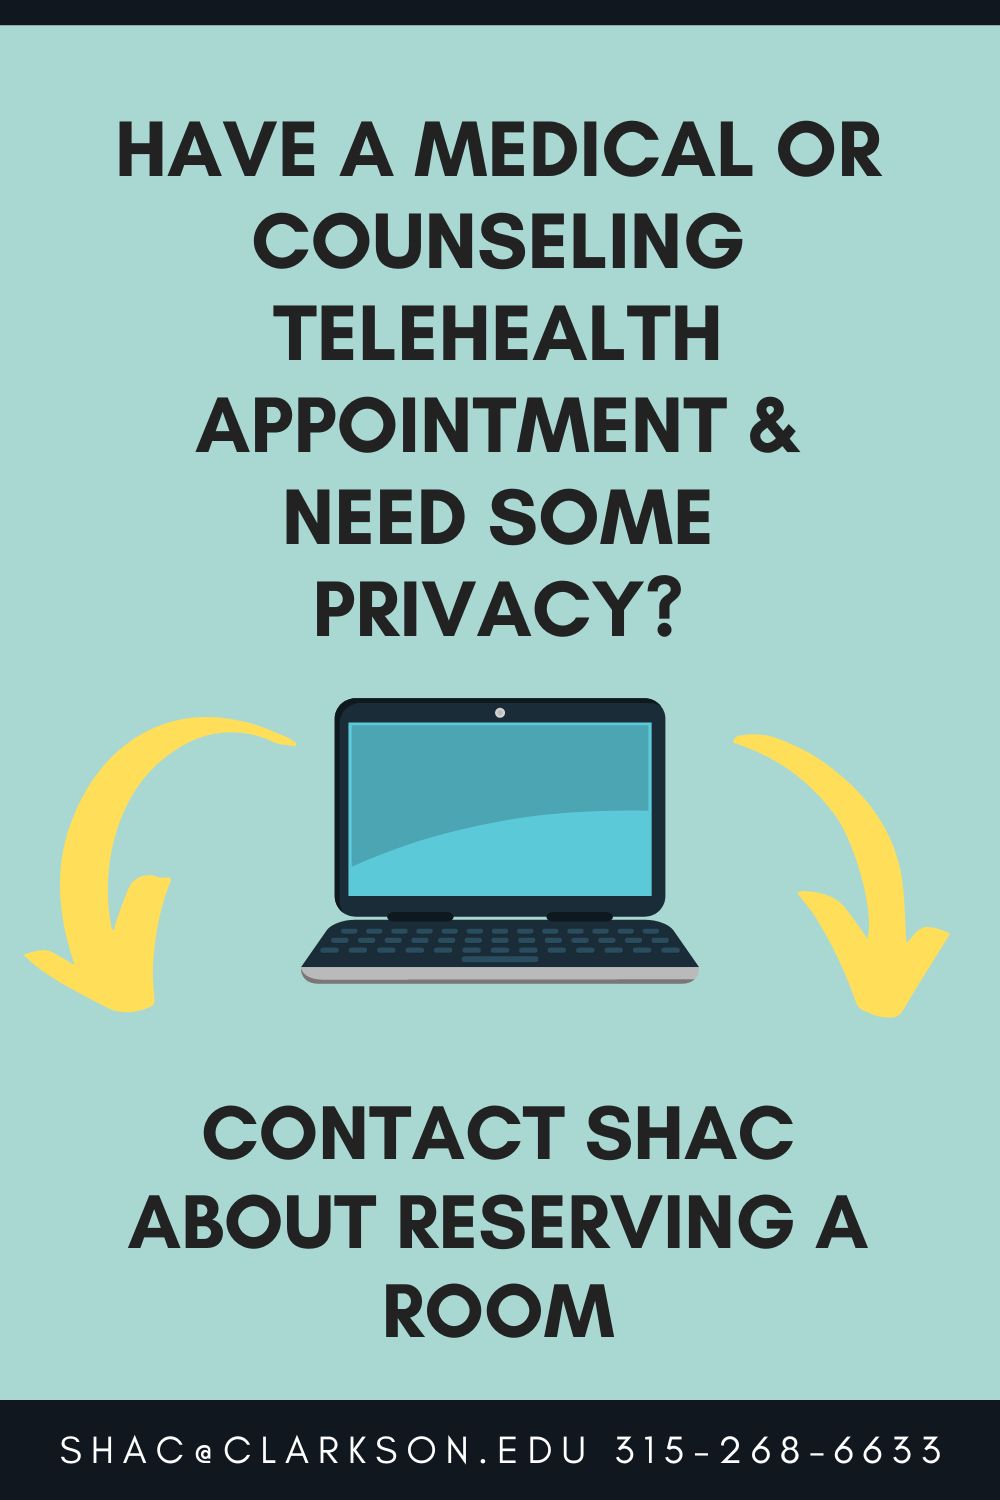 Reserve a Room for Telehealth Appointment